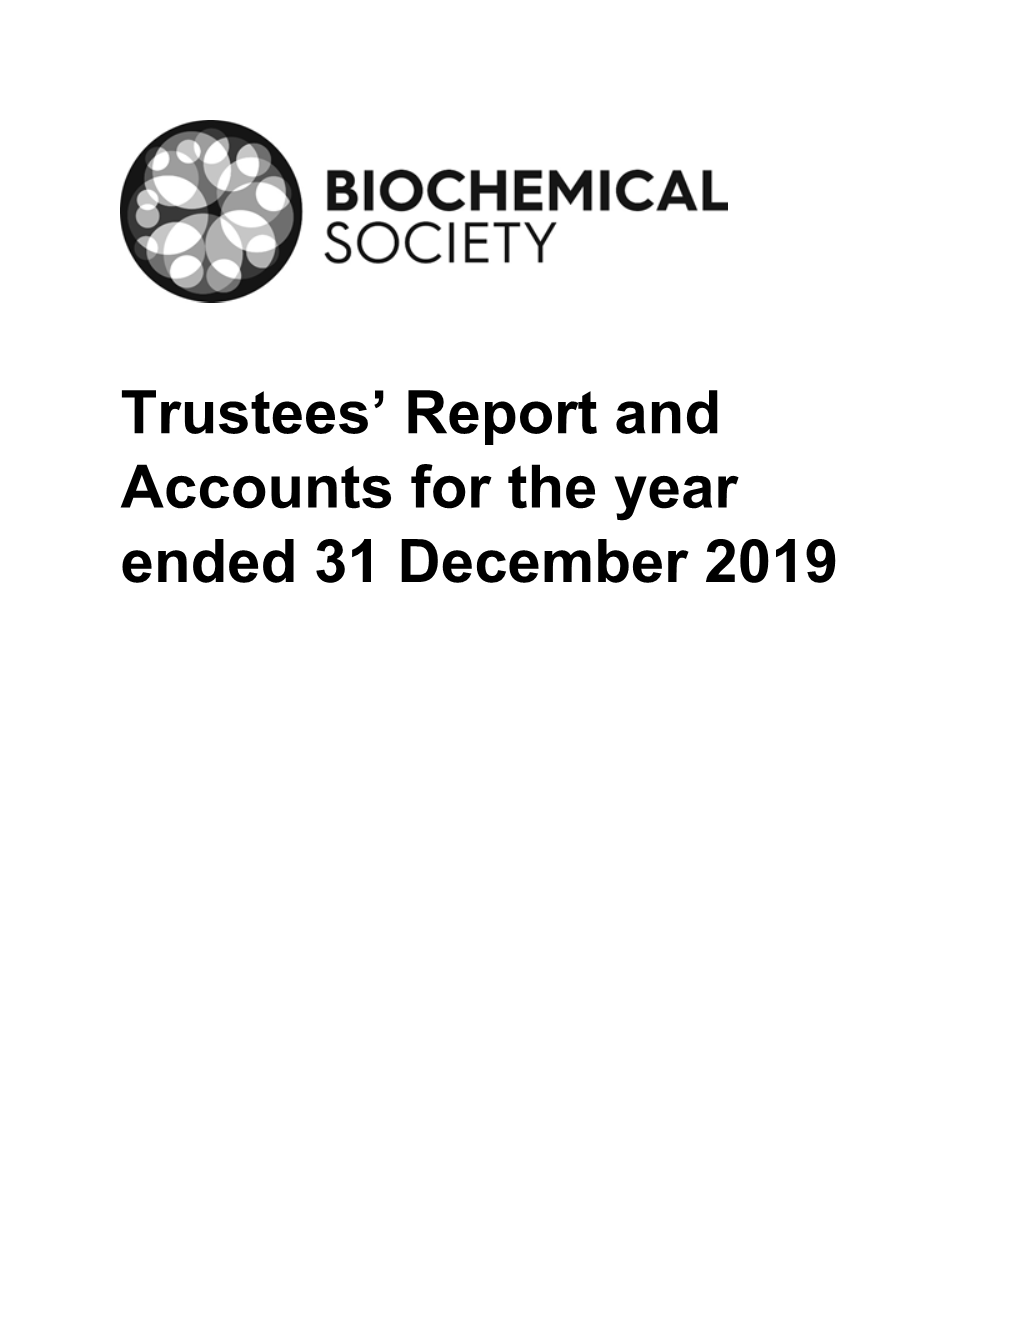 Trustees' Report and Accounts for the Year Ended 31 December 2019